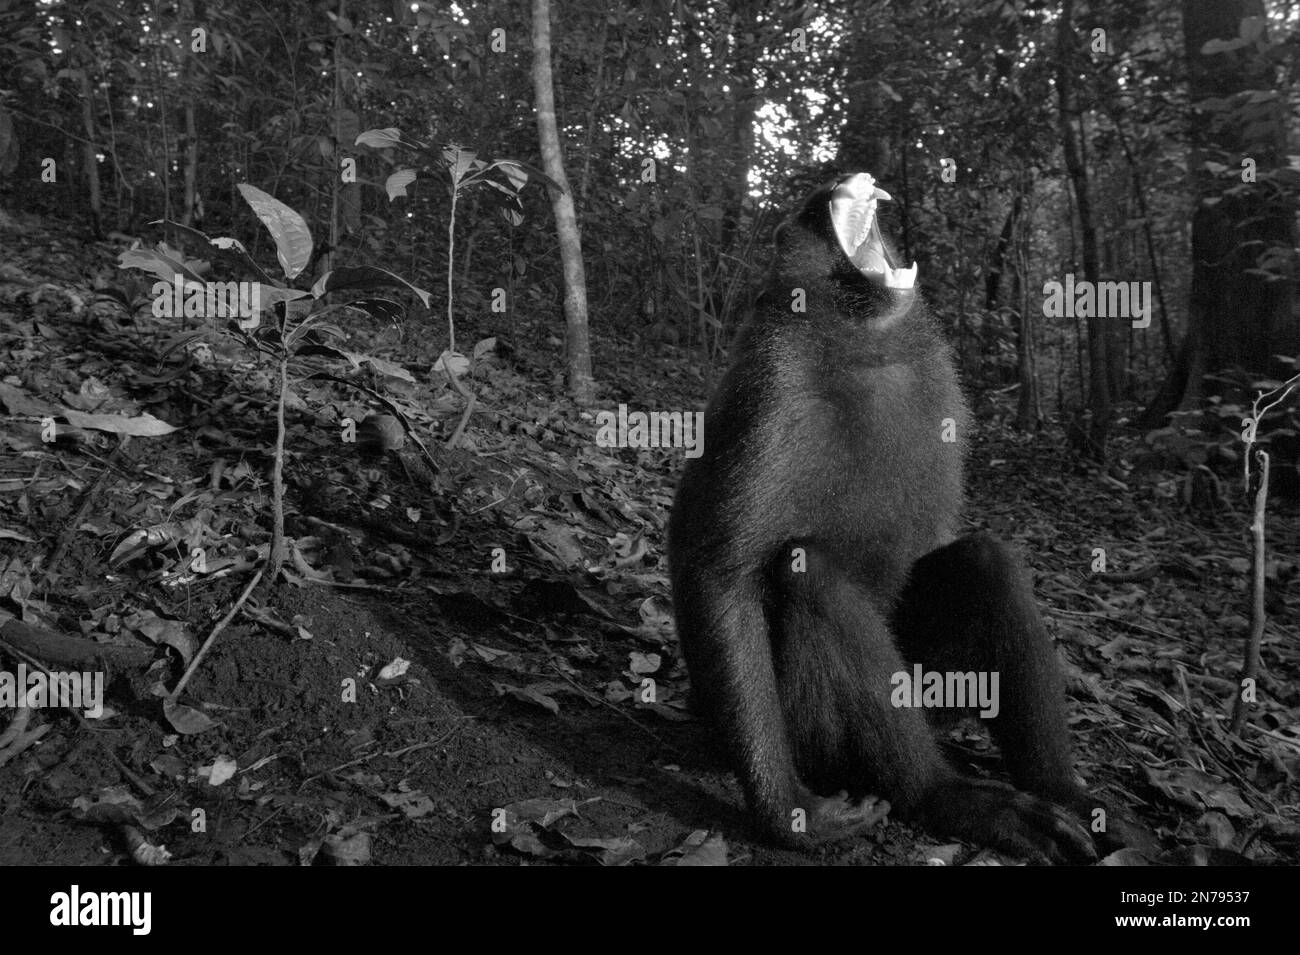 A Sulawesi crested-black macaque (Macaca nigra) is showing a scream-like, wide-opening mouth display in Tangkoko forest, North Sulawesi, Indonesia. Facial expressions are a main communication channel used by many different species of primate, wrote a team of primate scientists led by Jerome Micheletta in their 2015 paper accessed through PubMed (National Library of Medicine, National Center for Biotechnology Information). Stock Photo